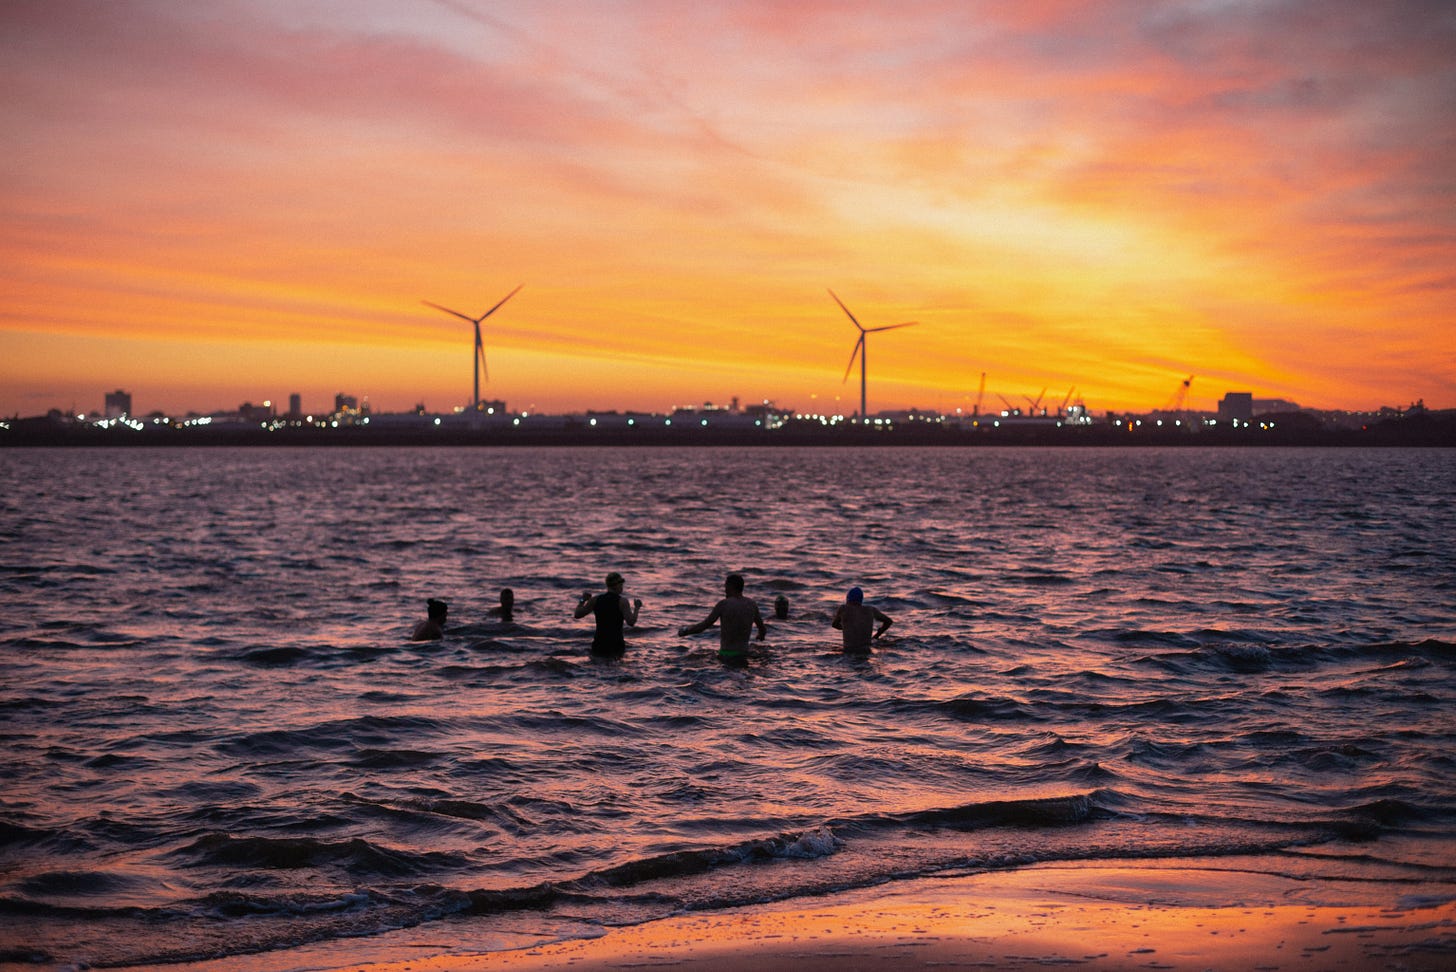 A group of people standing in the River Mersey as a strong sunrise illuminates the morning sky.